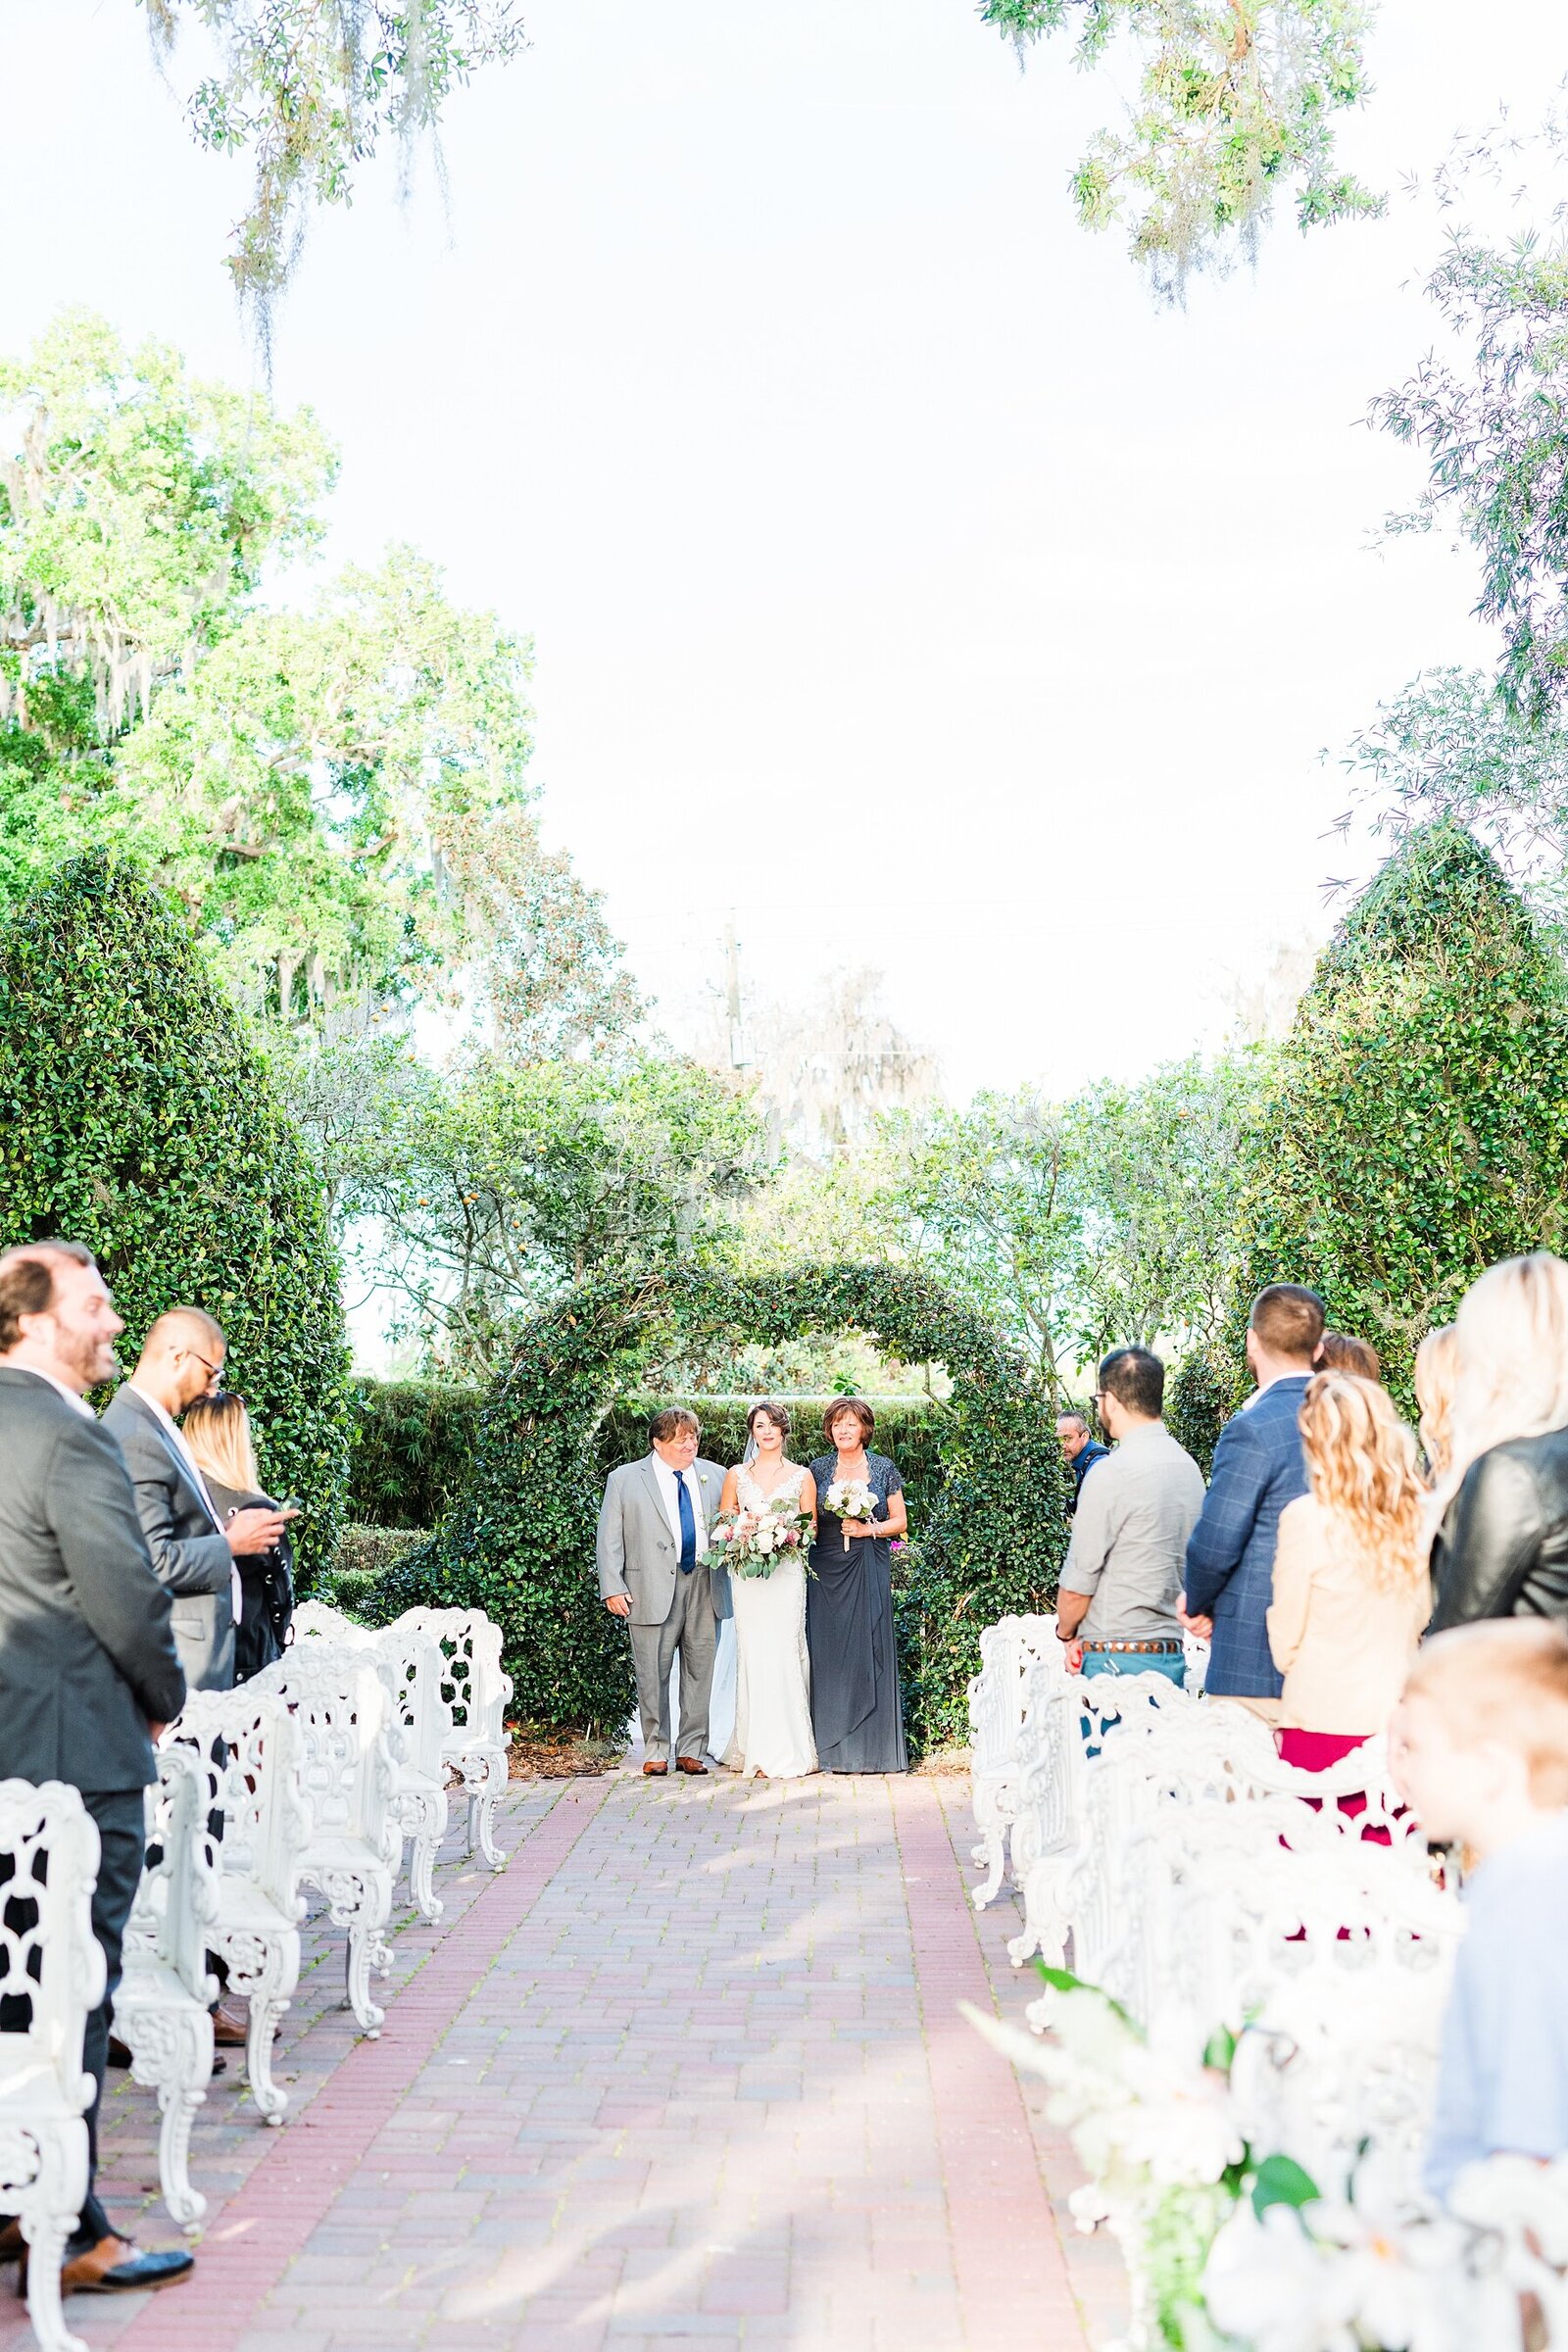 Ceremony photos | Town Manor | Chynna Pacheco Photography